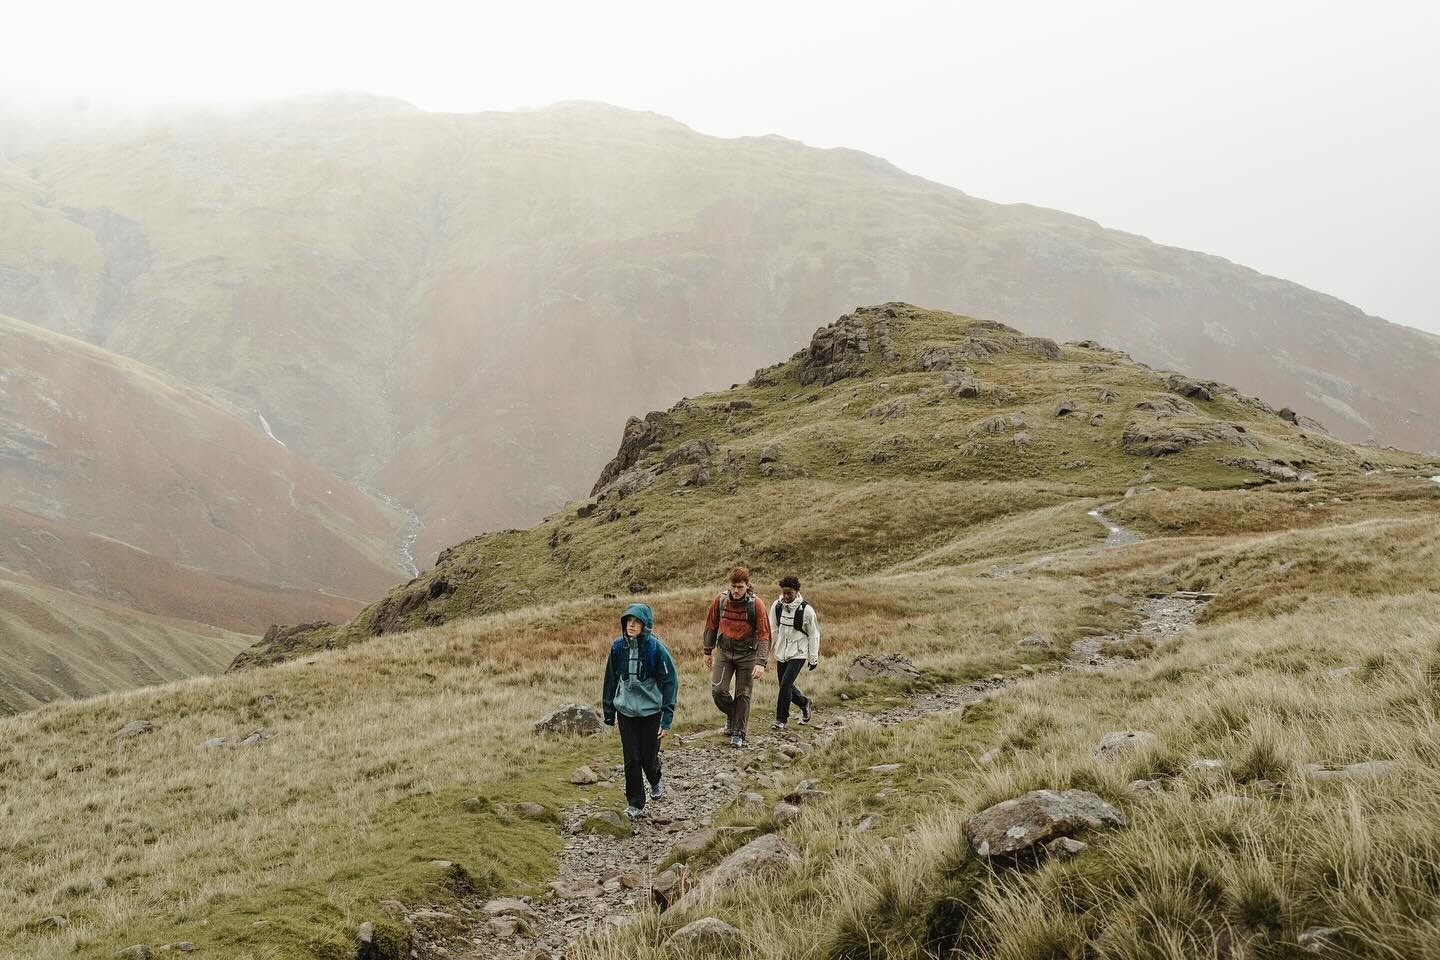 Heading up to the Lakes again next week (can&rsquo;t wait to share more about that - stay tuned!) and I&rsquo;ve got to say, I am obsessed with this landscape, captured beautifully here by @mw.lens for @salomon. The weather wasn&rsquo;t great but it 